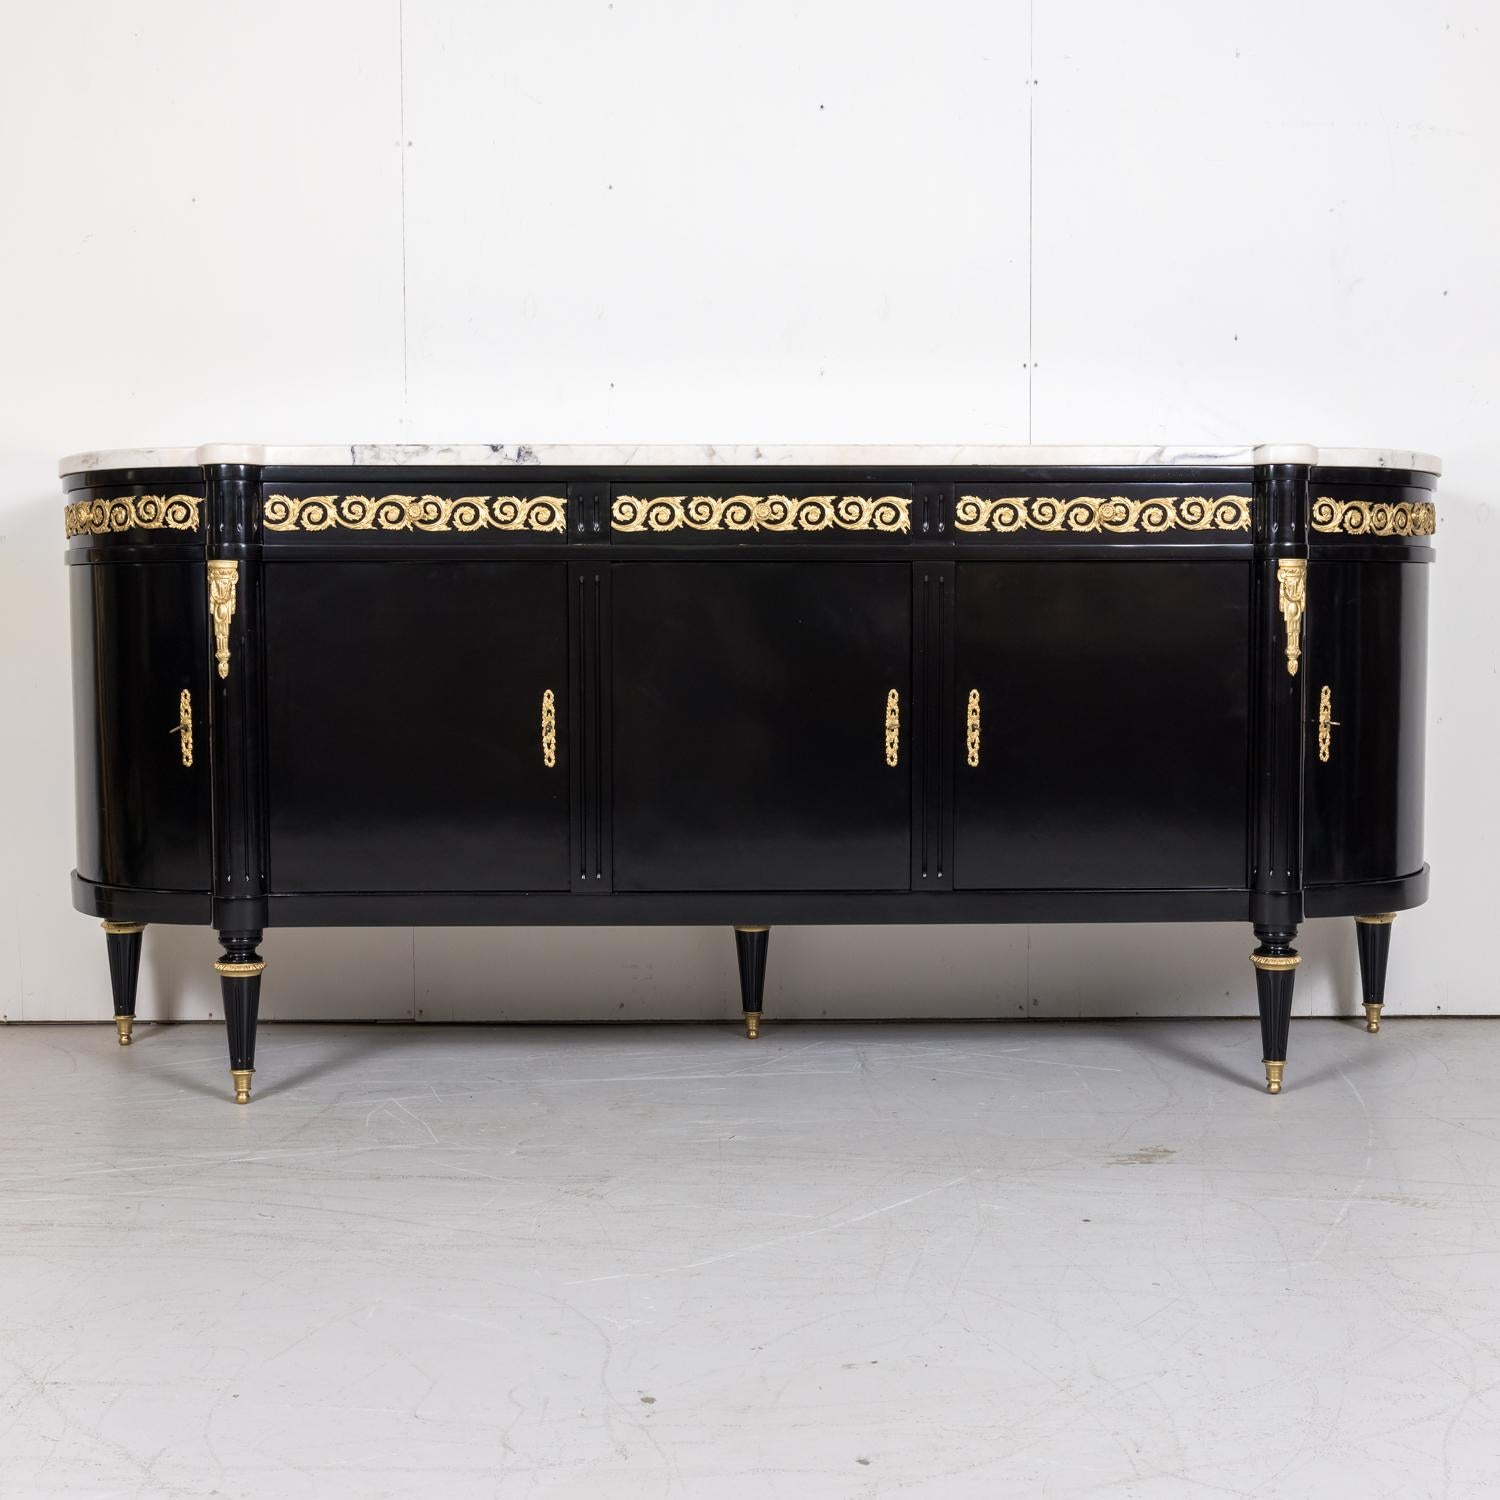 An exceptional and stunning mid-20th century French Louis XVI style five drawer, five door demilune enfilade buffet attributed to the famed Maison Mercier Freres of Paris, circa 1940s. Having a lustrous newly ebonized semi-gloss lacquered finish,